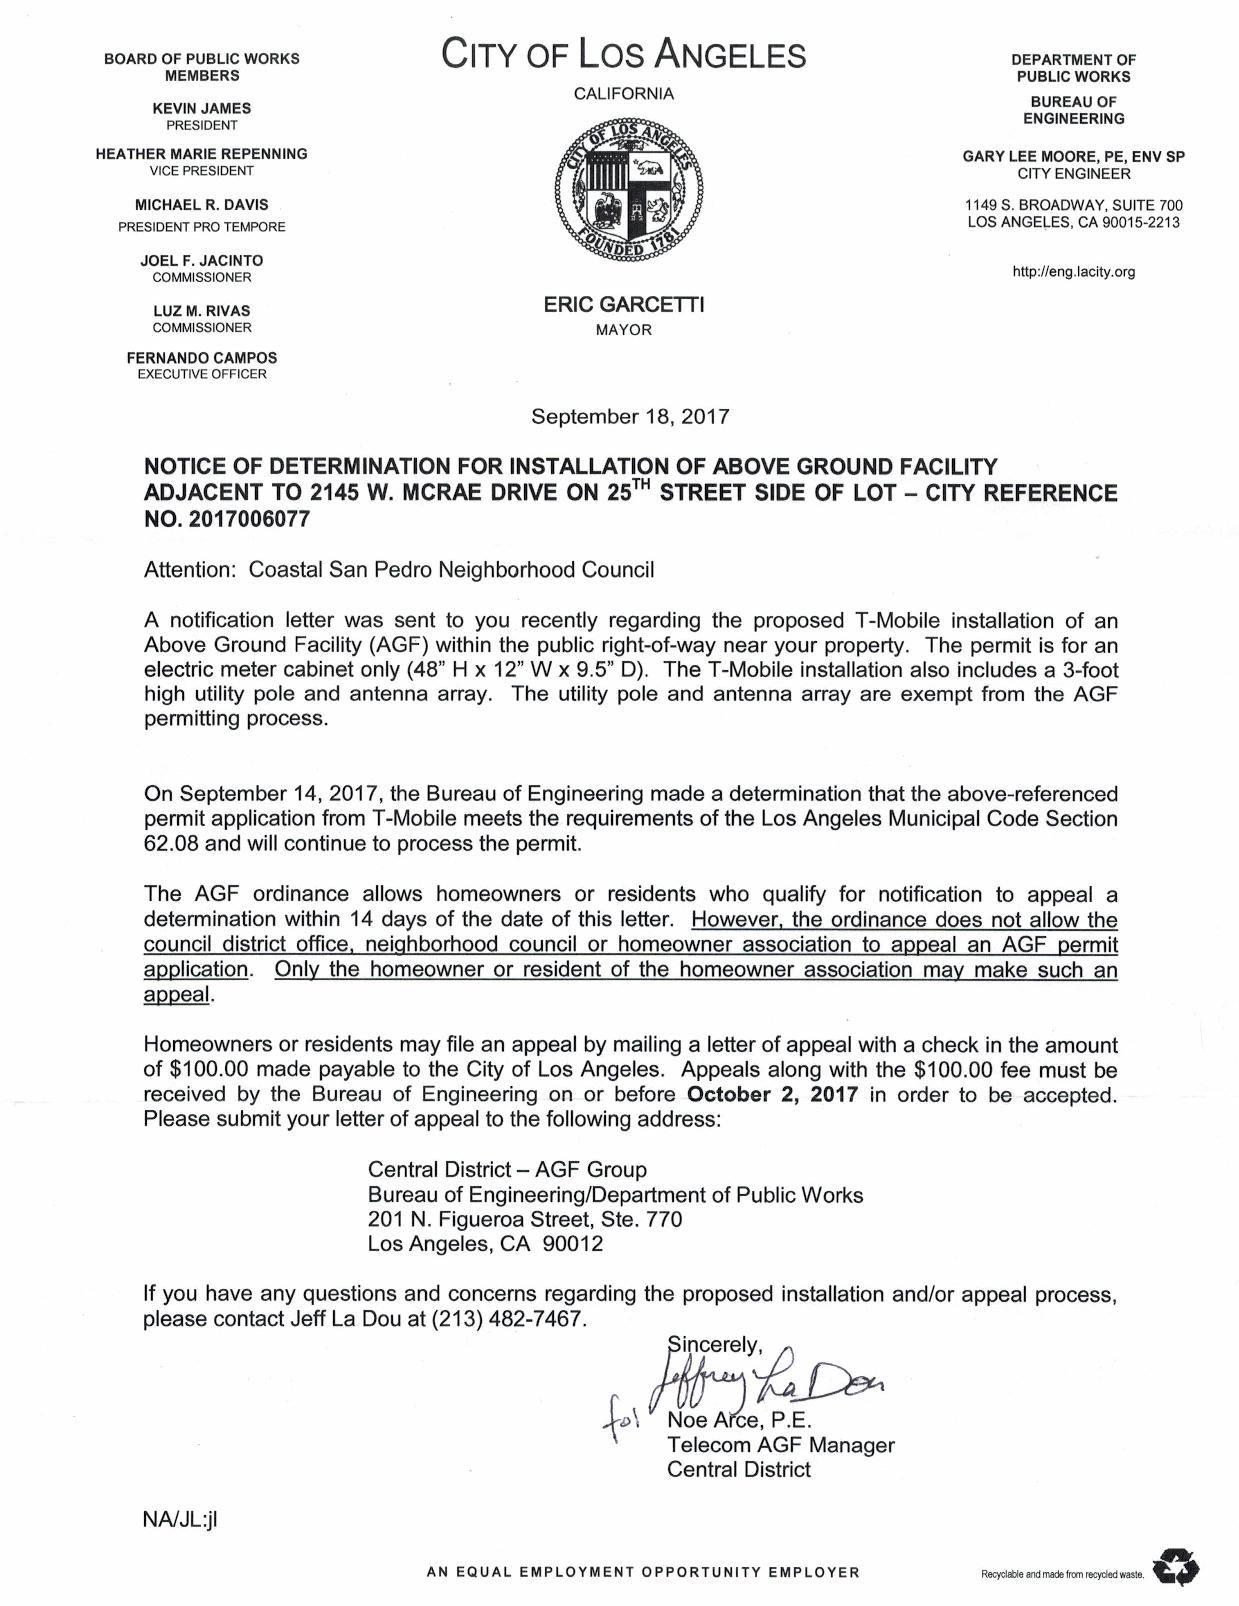 Los Angeles Bureau of Engineering Logo - Notice Of Determination For Installation Of T Mobile Above Ground